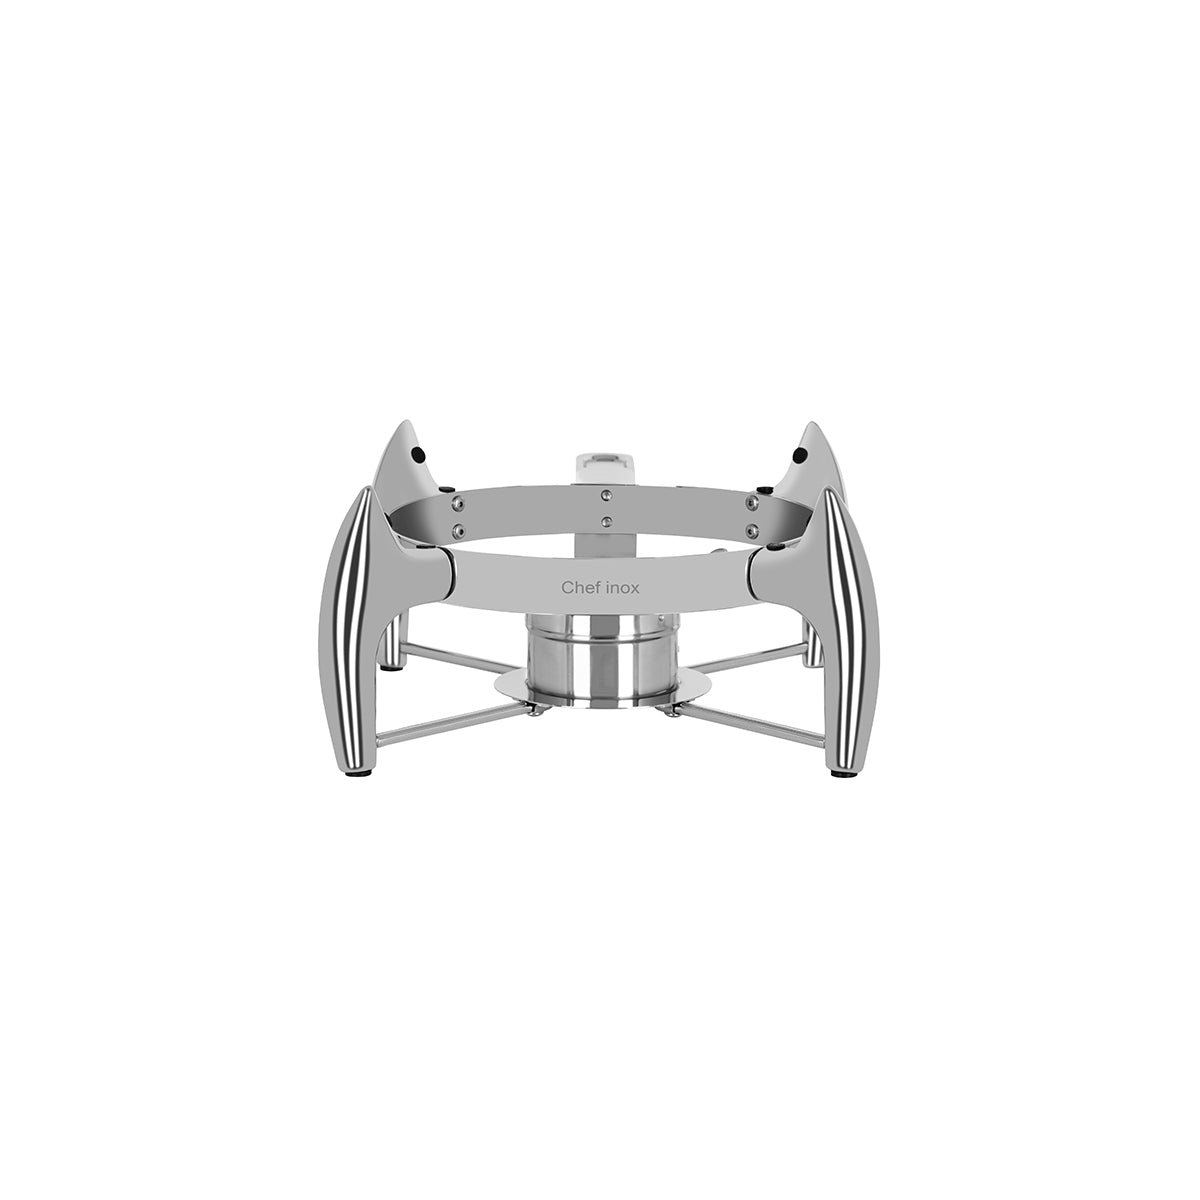 54919-S Chef Inox Chafer Round Stand Stainless Steel to Suit 54919 Tomkin Australia Hospitality Supplies